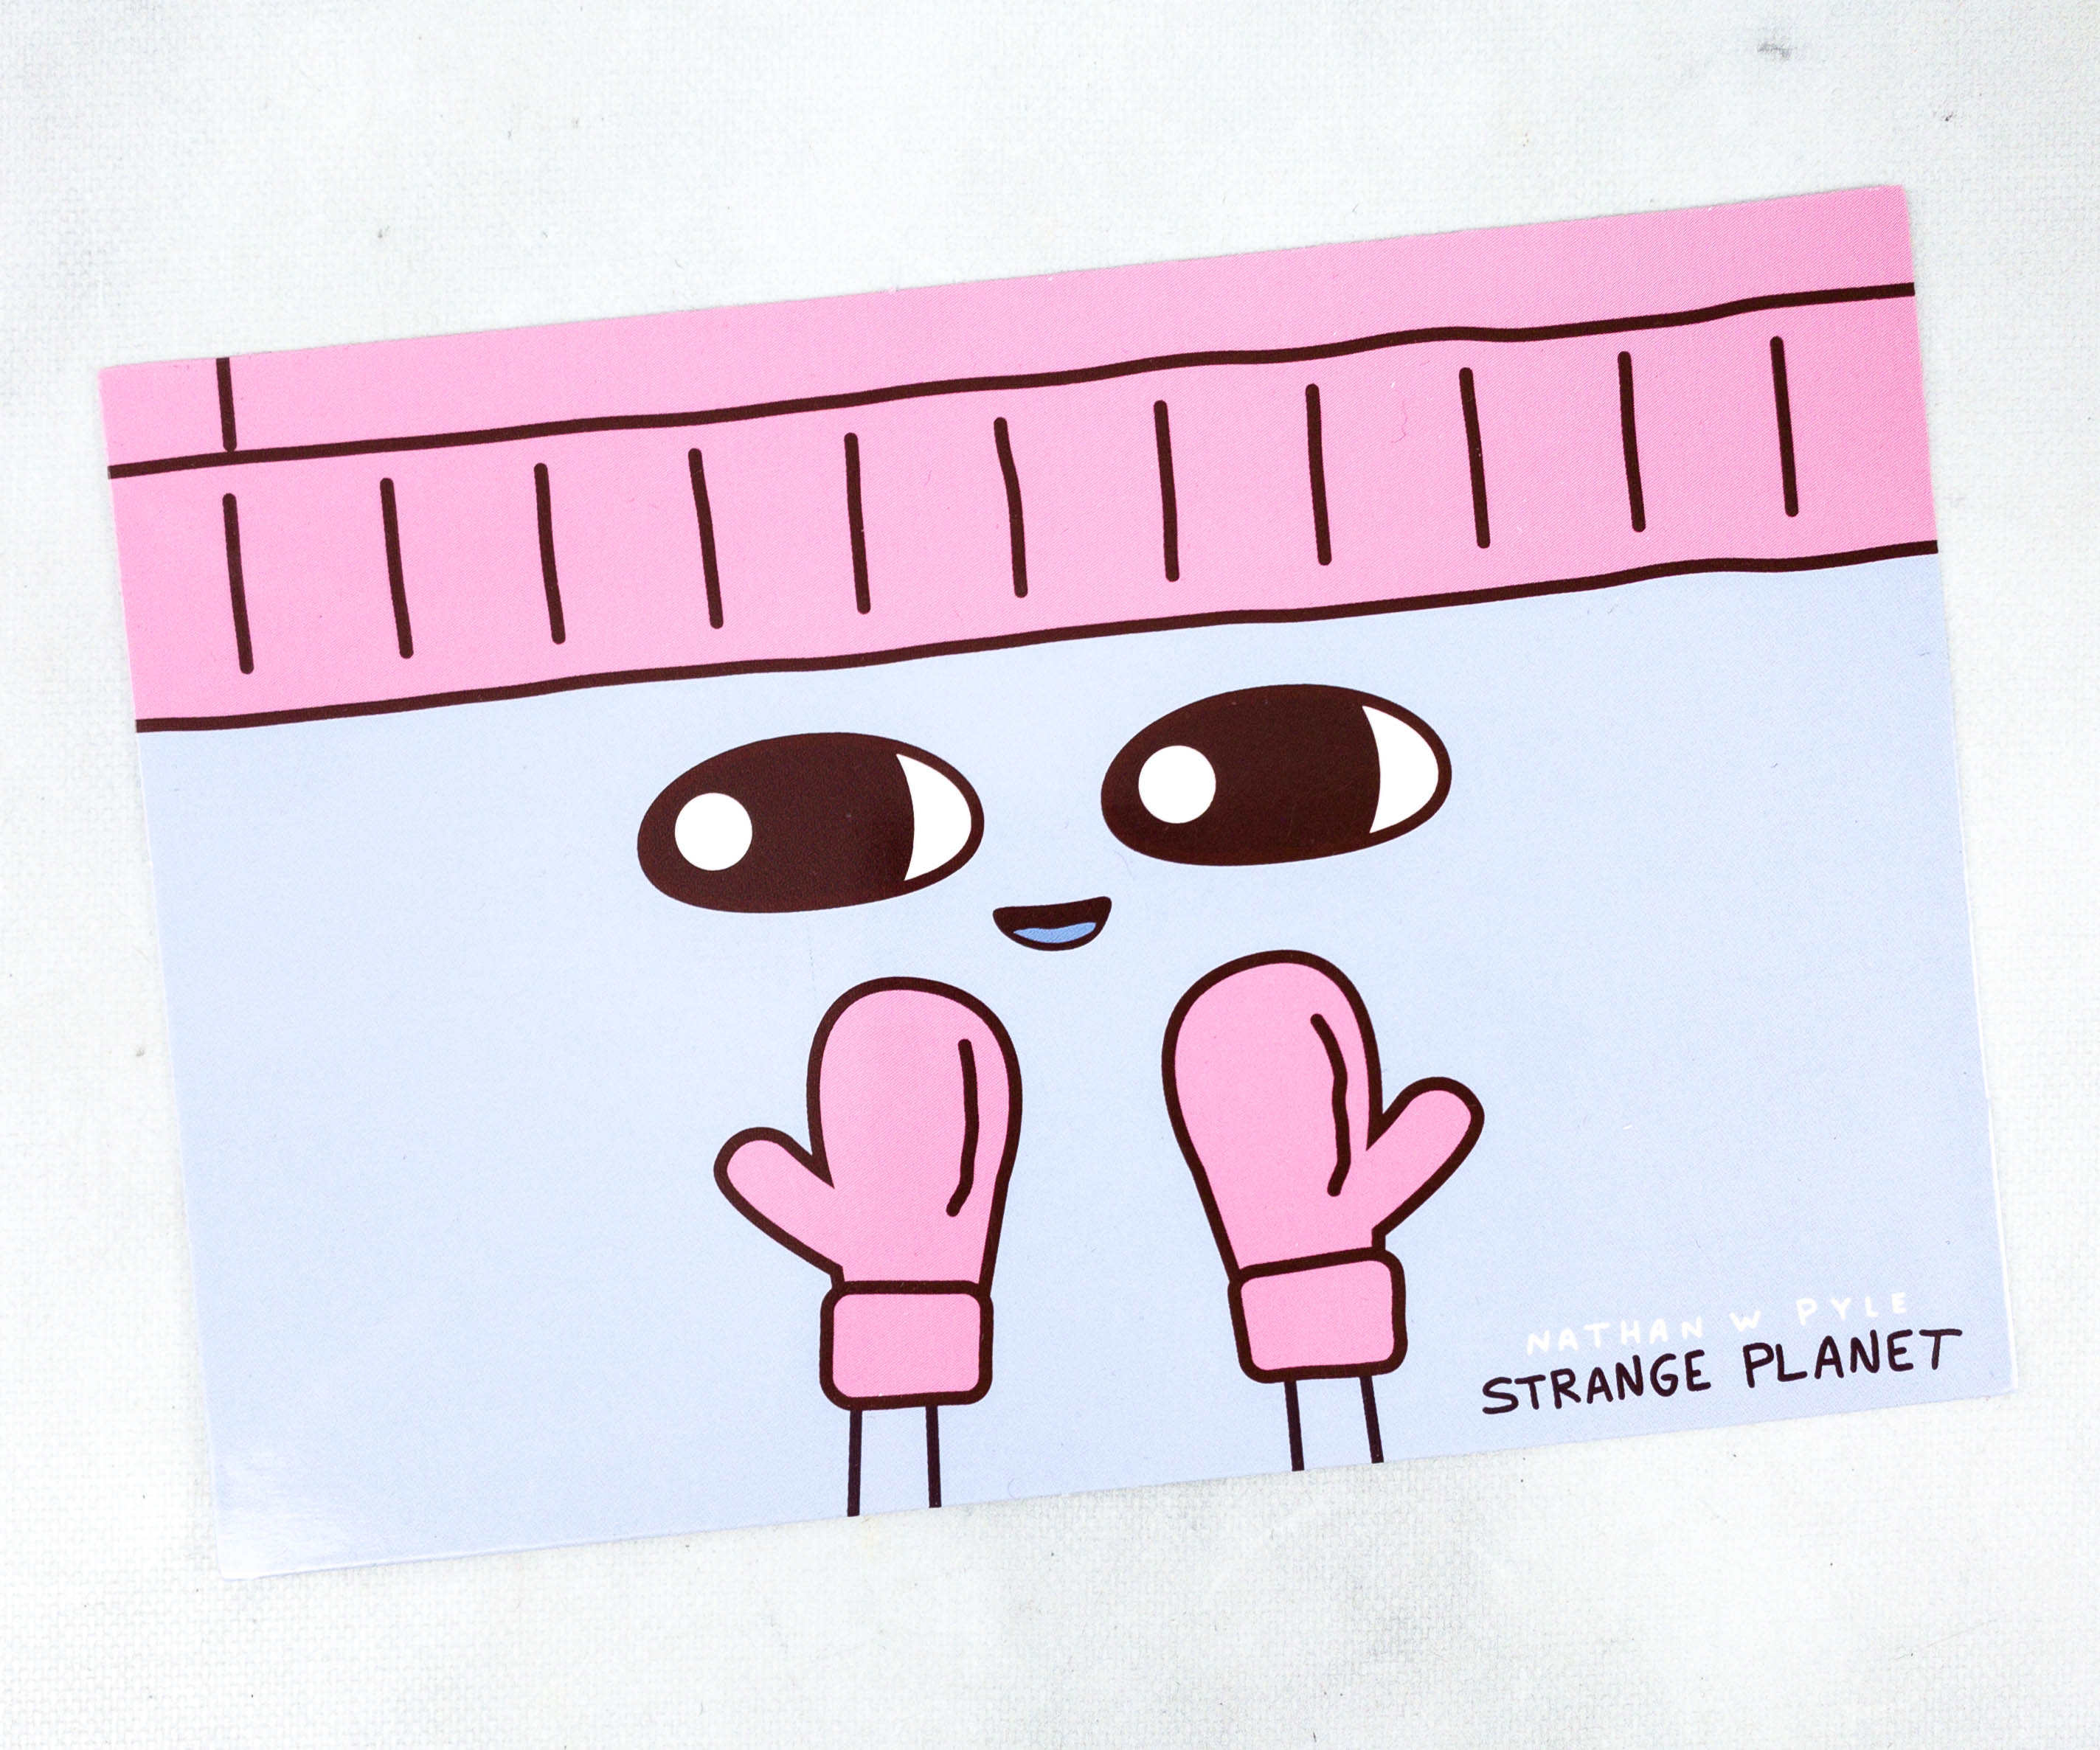 STRANGE PLANET SPECIAL PRODUCT: AND YET Women's Socks, Nathan W Pyle Shop